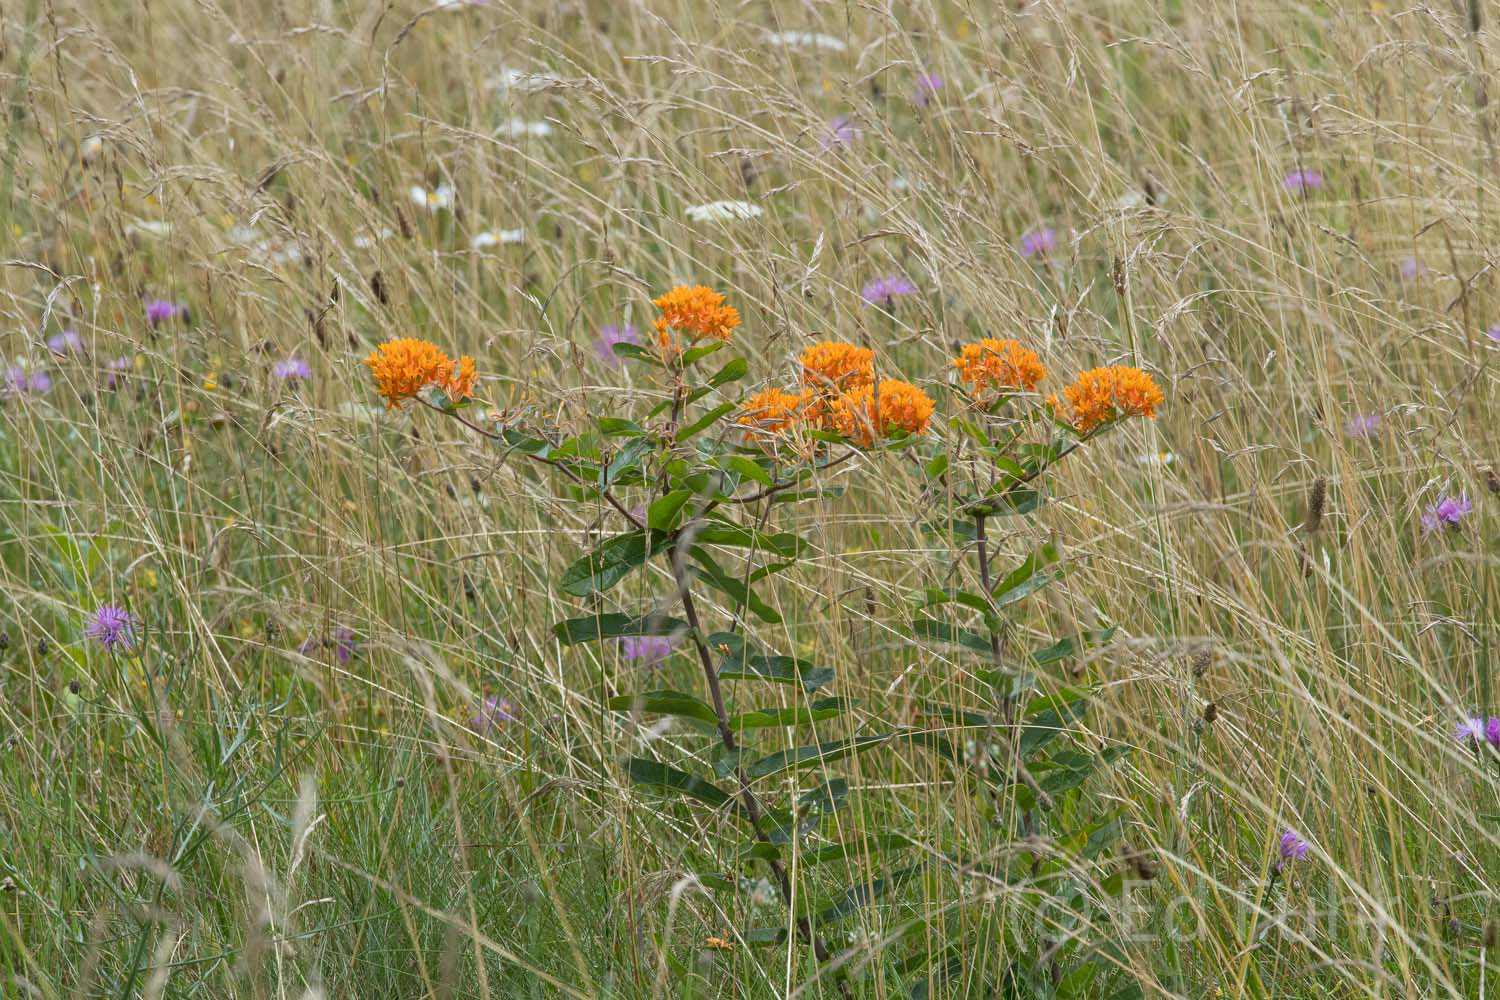 Orange Butterfly Weed, is in reality a beautiful wildflower that blooms in the open meadows in late summer,